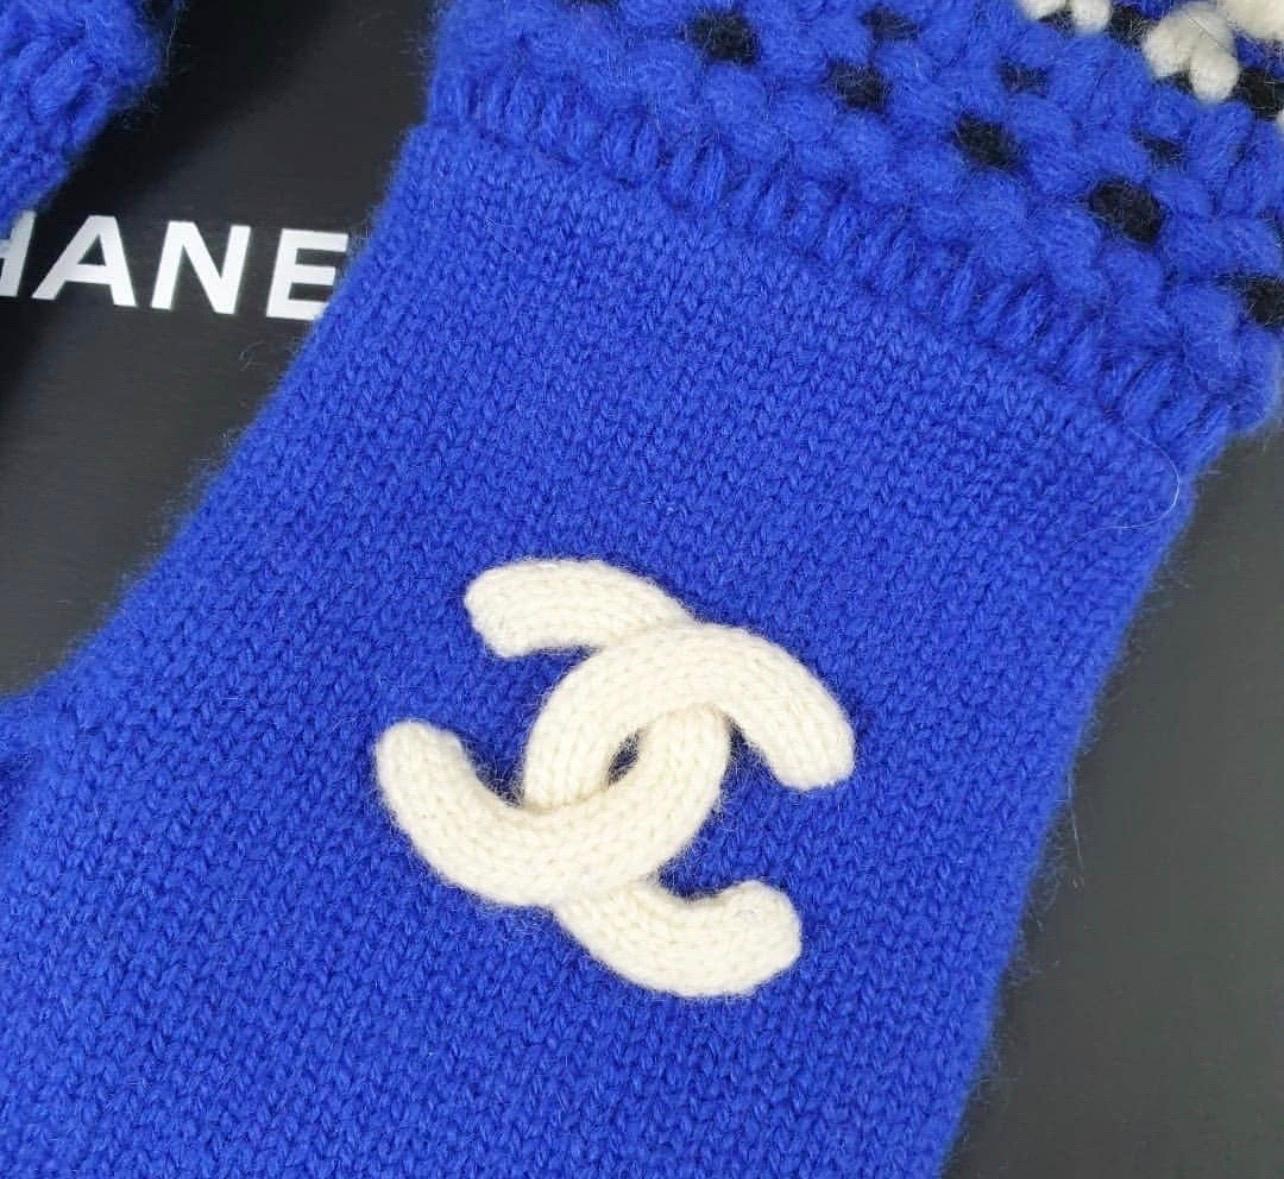 Chanel knitted gloves.
 100% cashmere. 
Excellent condition